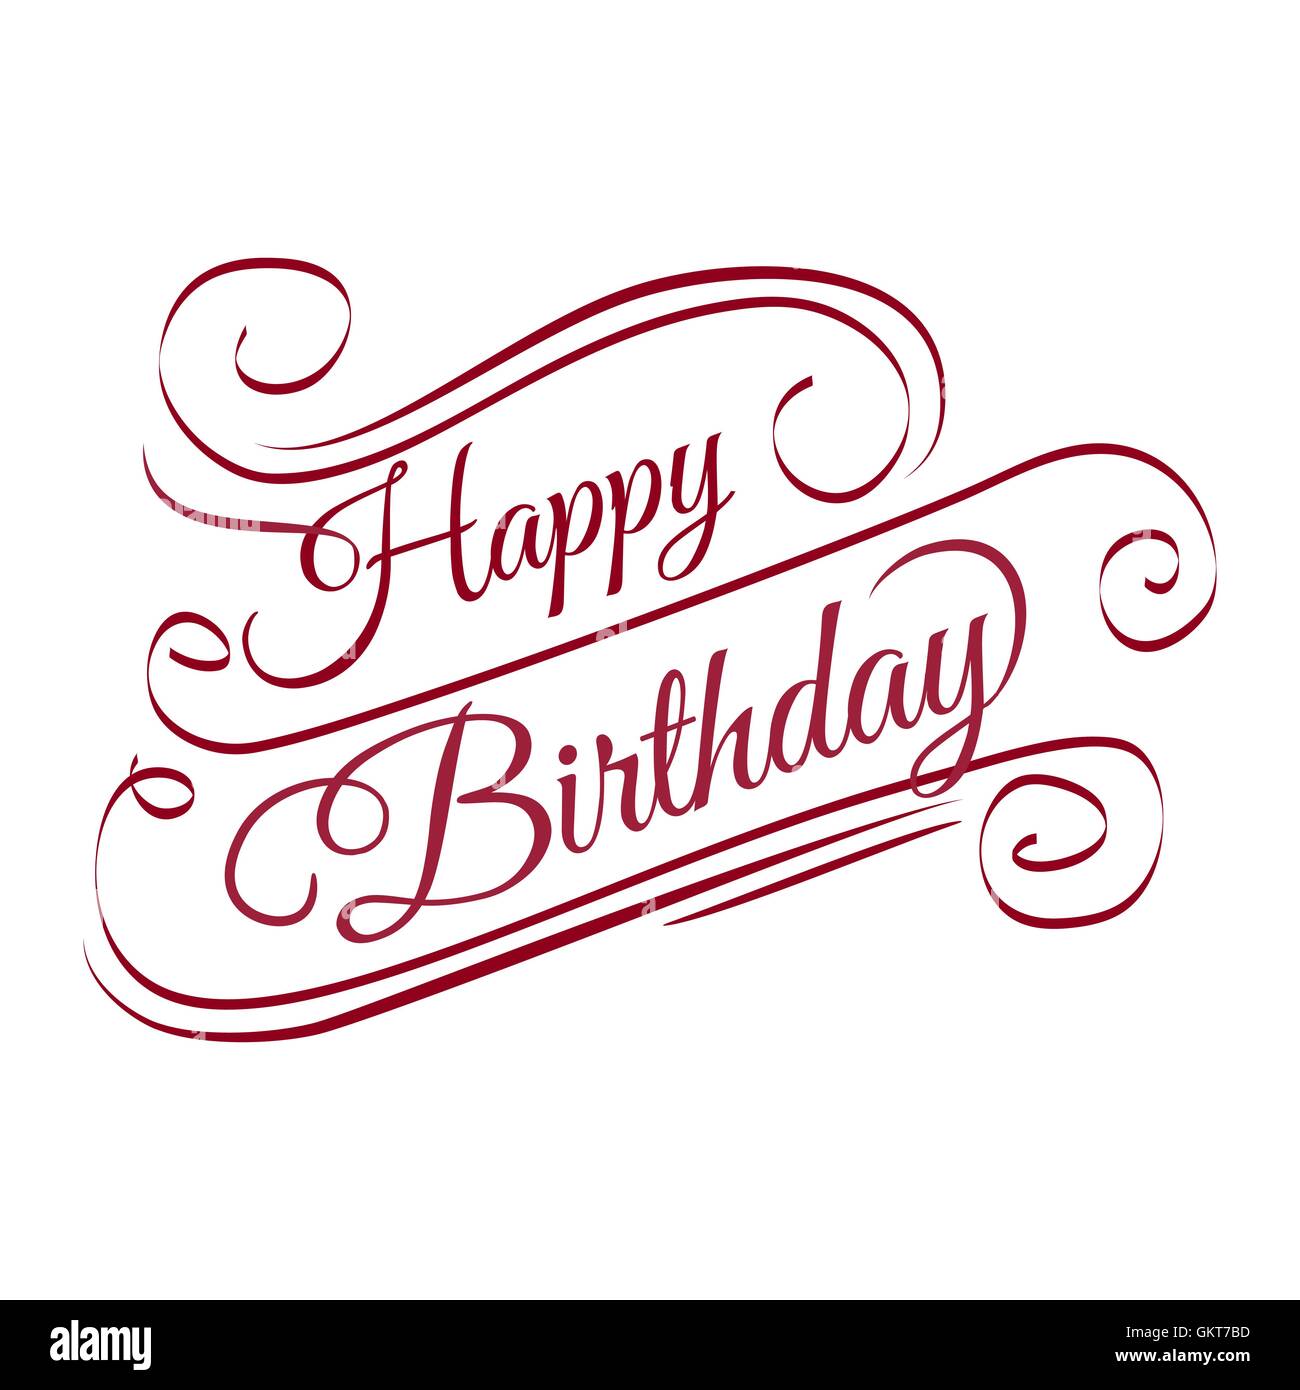 Happy birthday text Cut Out Stock Images & Pictures - Alamy